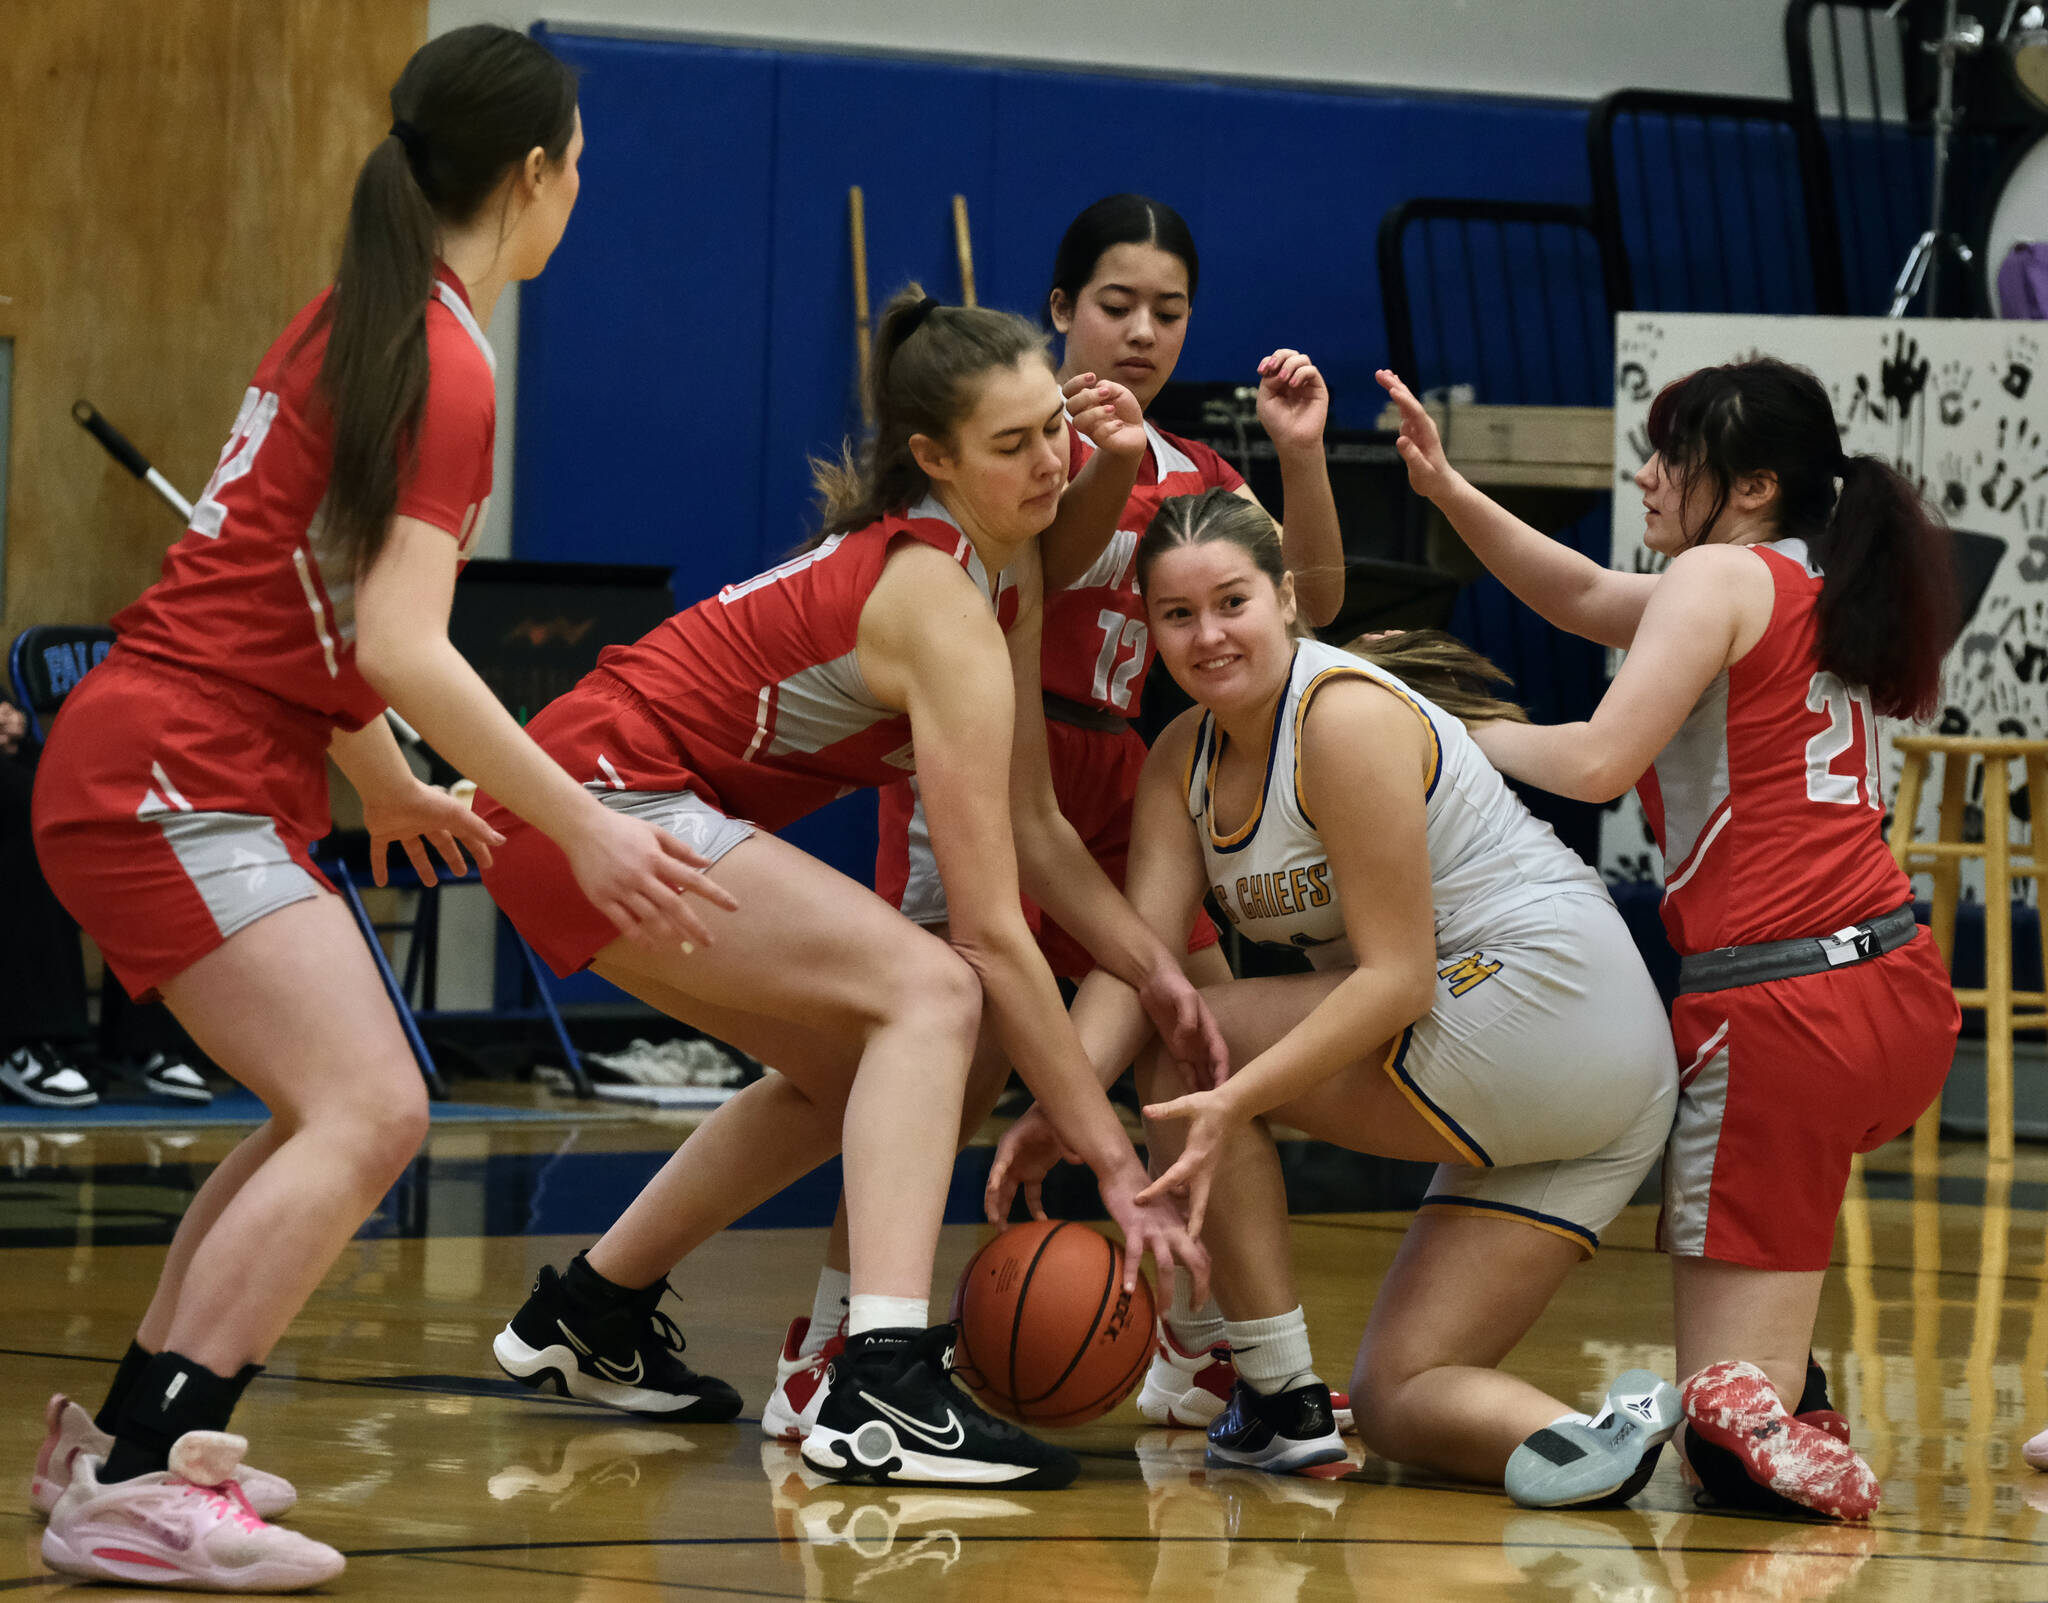 Metlakatla junior Ryley Booth battles for a loose ball with Wrangell sophomore Aubrey Wynne, senior Kiara Harrison, freshman Christina Johnson (12) and sophomore Addy Andrews (21) in the Region V 2A/4A Basketball Tournament on Thursday at Thunder Mountain High School in Juneau. (Klas Stolpe / For the Juneau Empire)